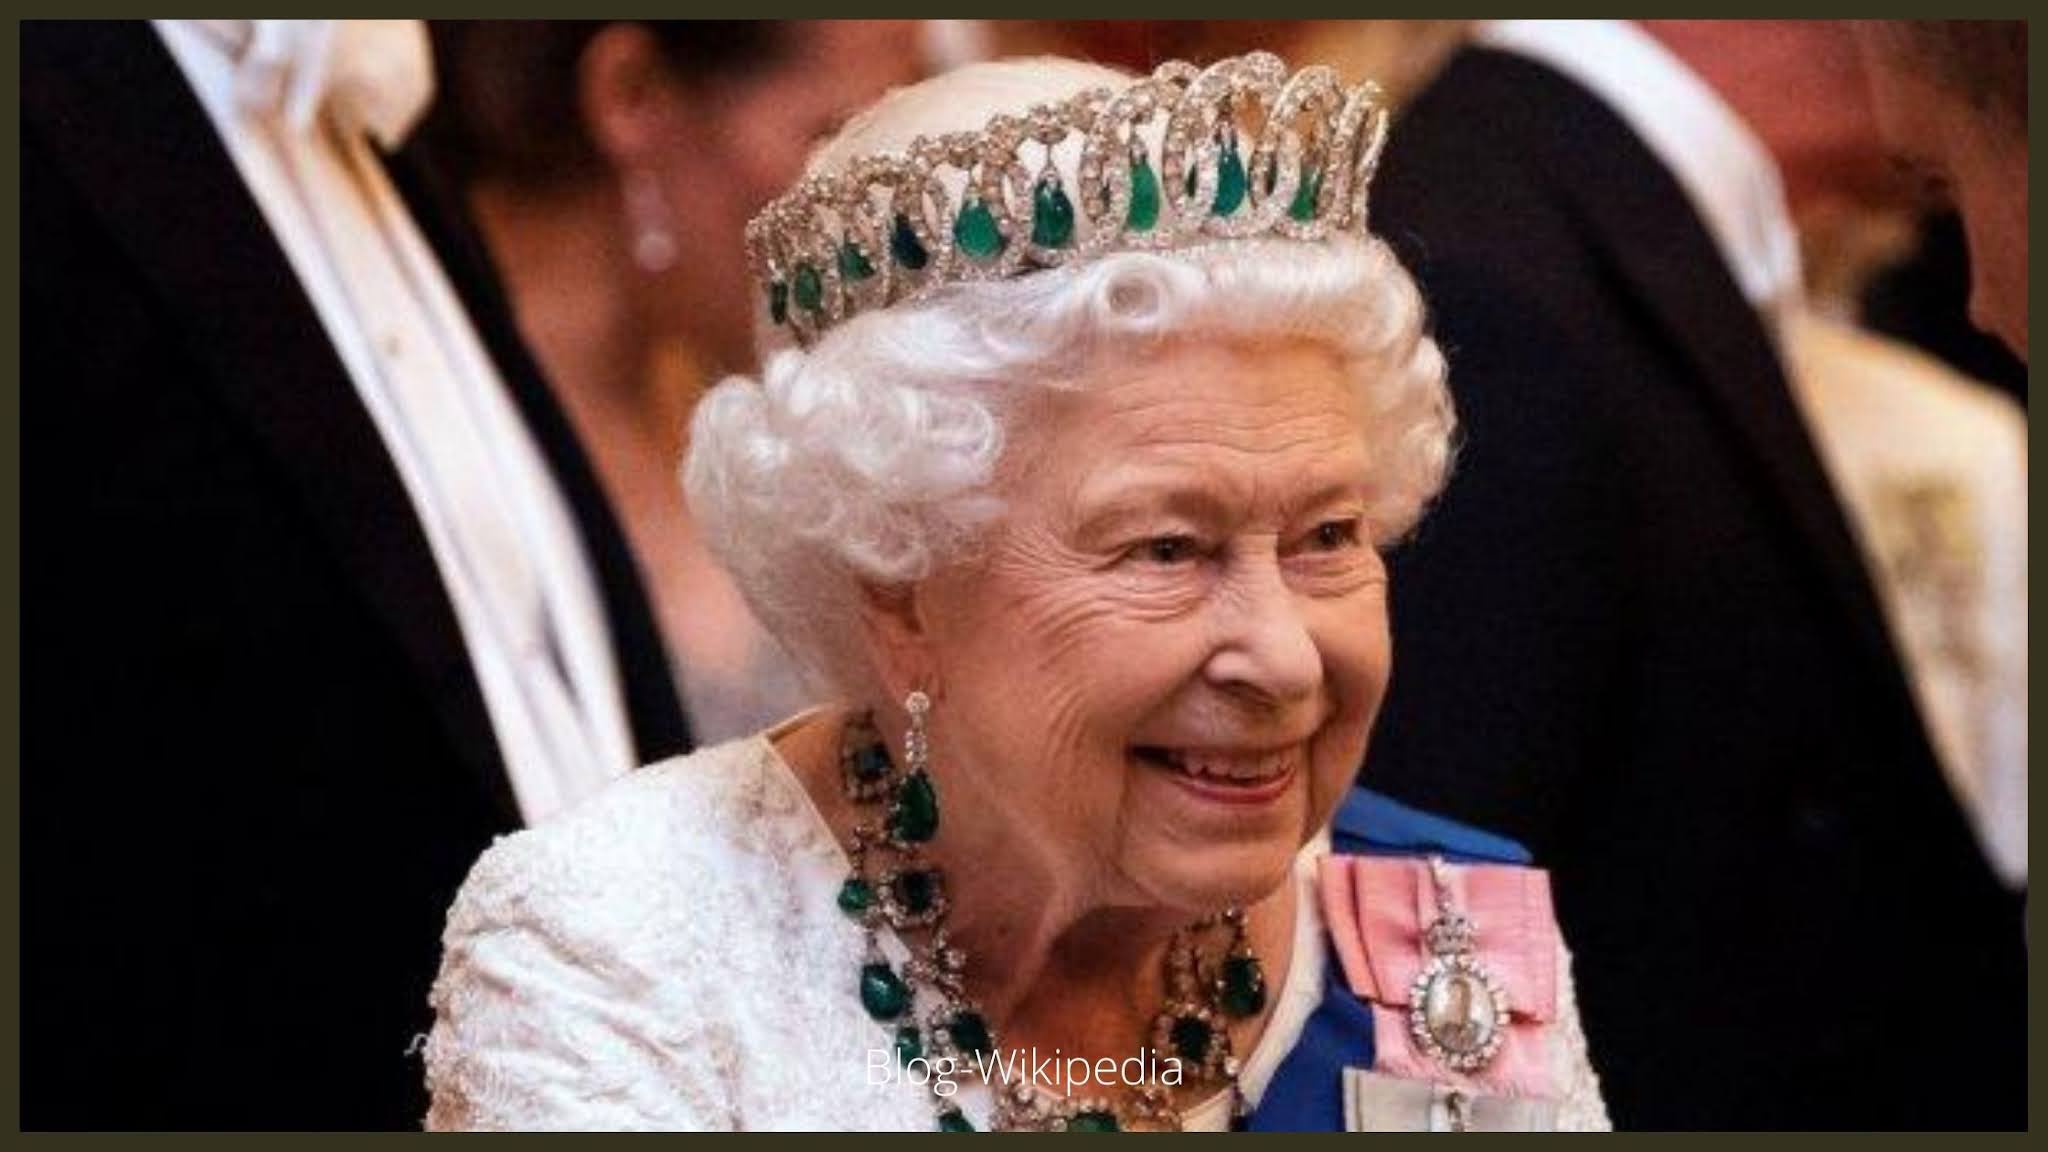 Leaked a series of events following the death of Queen Elizabeth II.